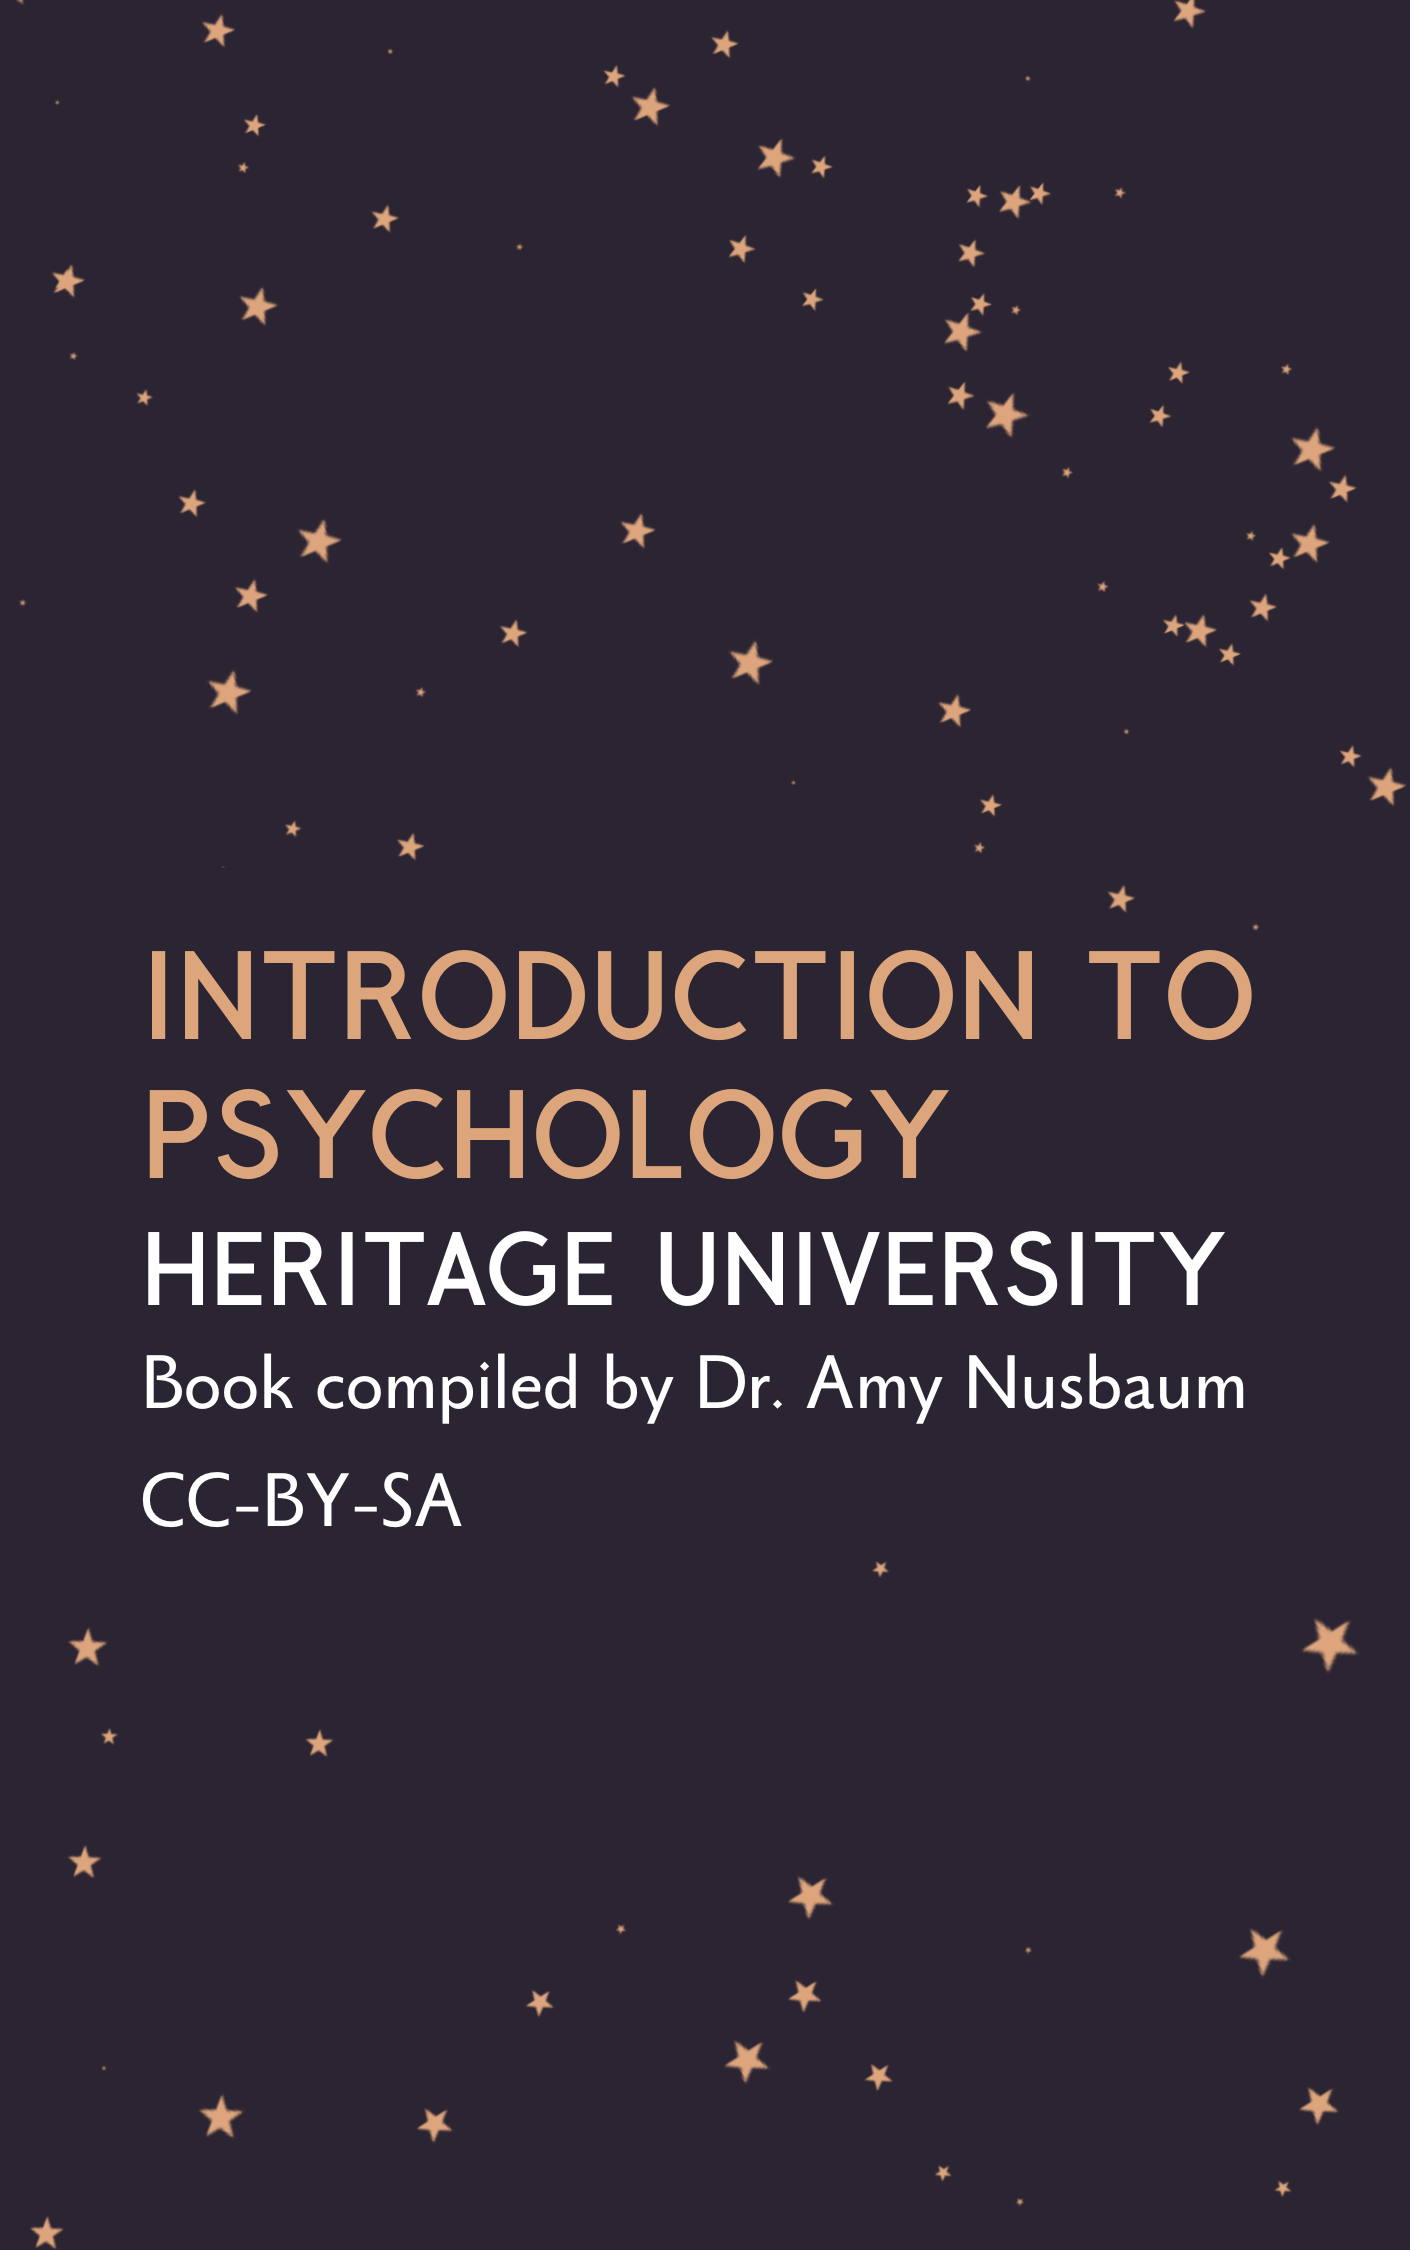 Title page: Introduction to Psychology, Amy Nusbaum, Ph.D., Heritage University